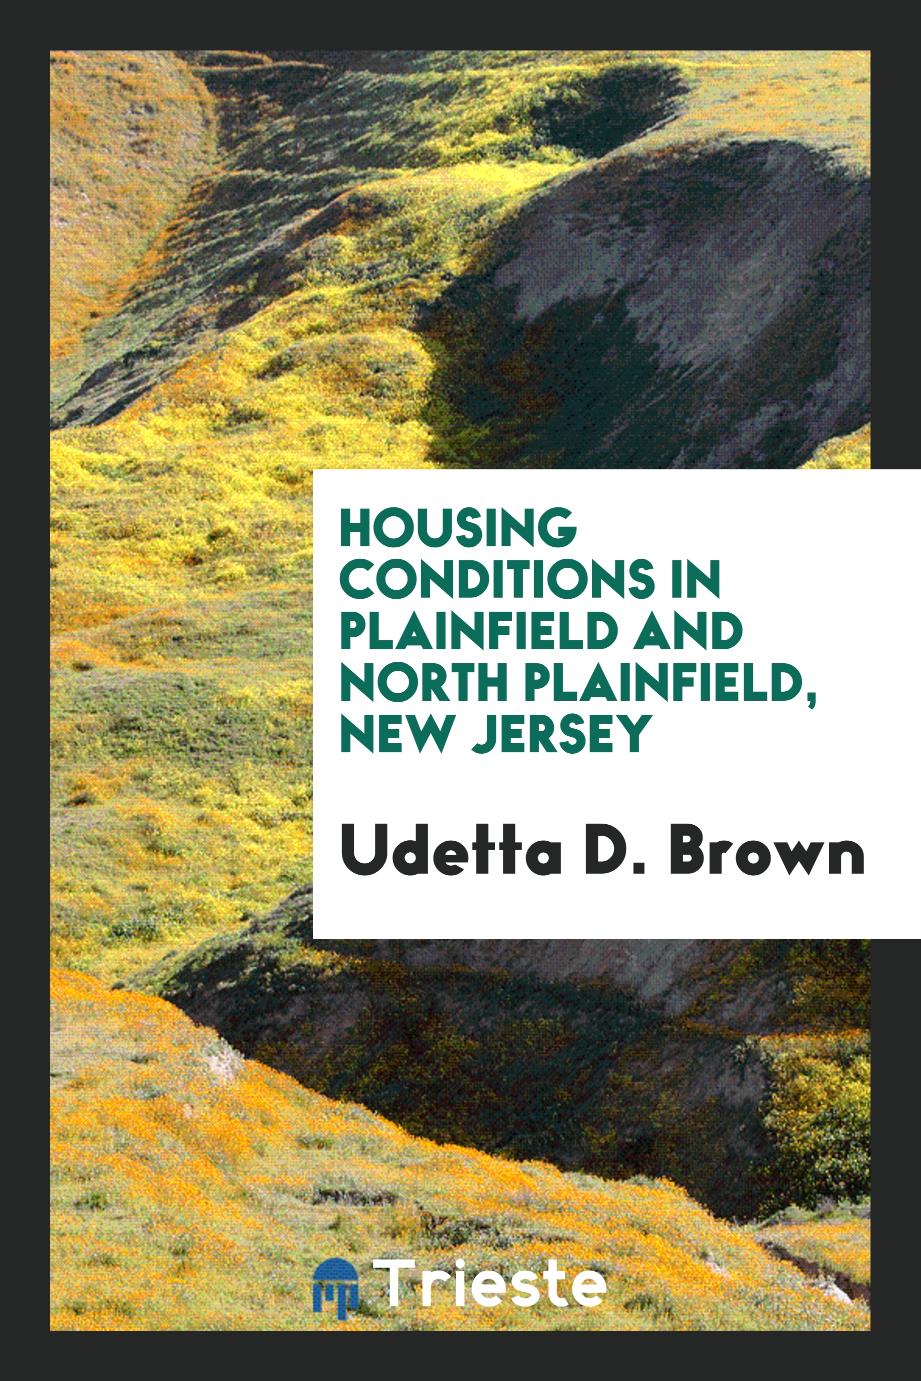 Housing Conditions in Plainfield and North Plainfield, New Jersey